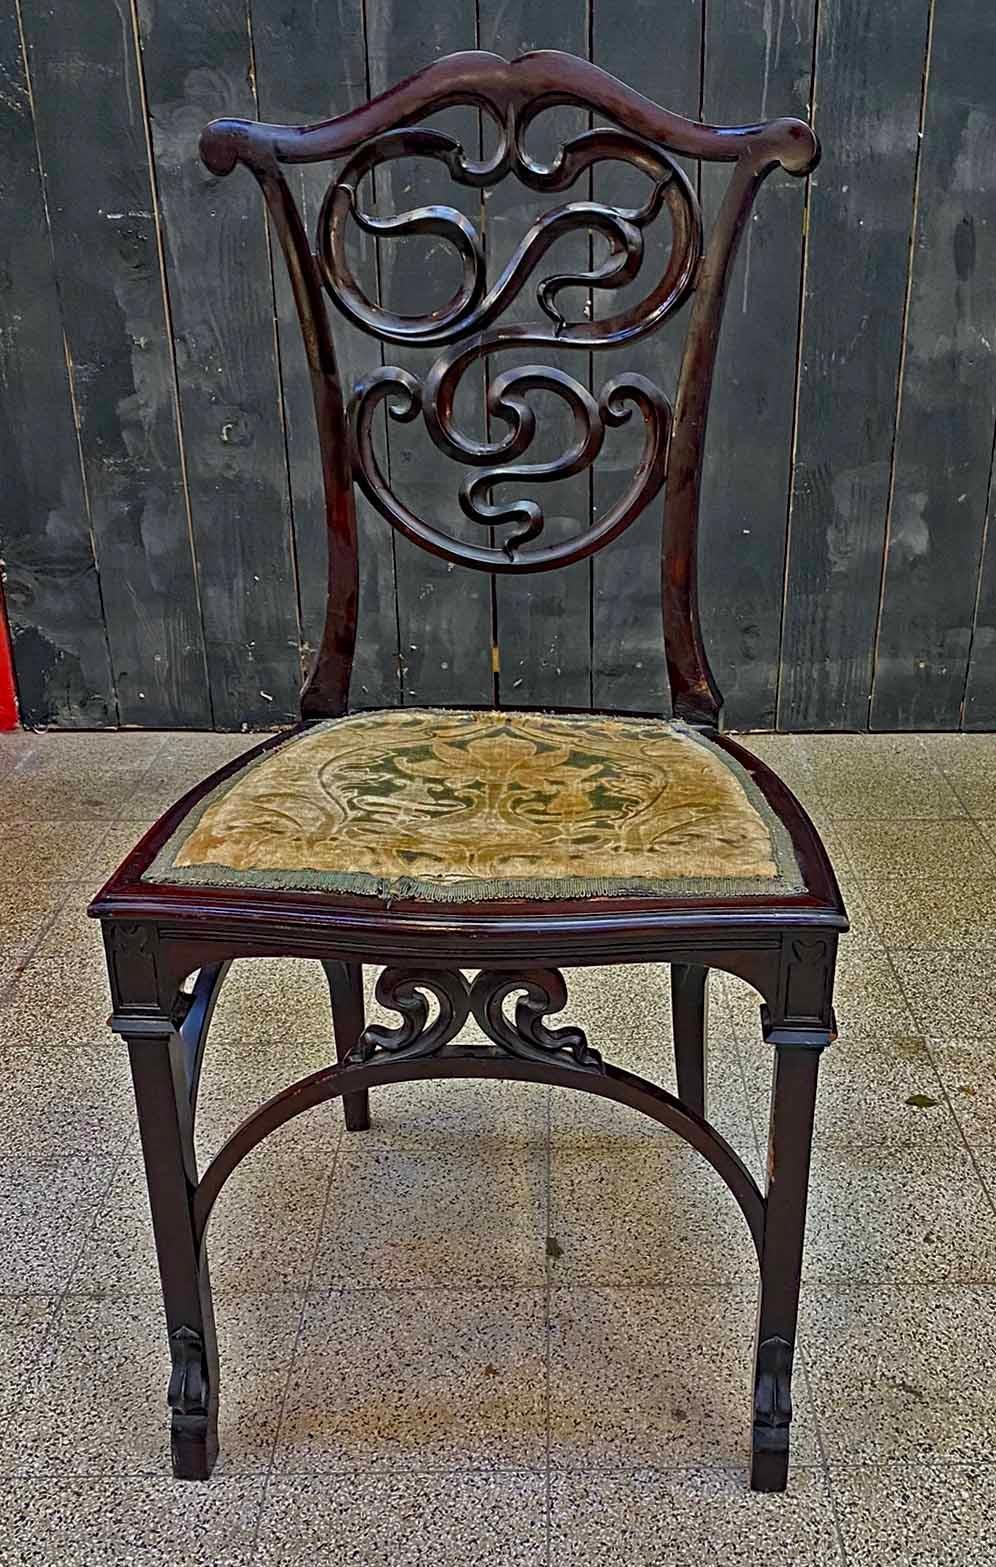 Art Nouveau period chair with Chinese pattern circa 1880, with its original fabric